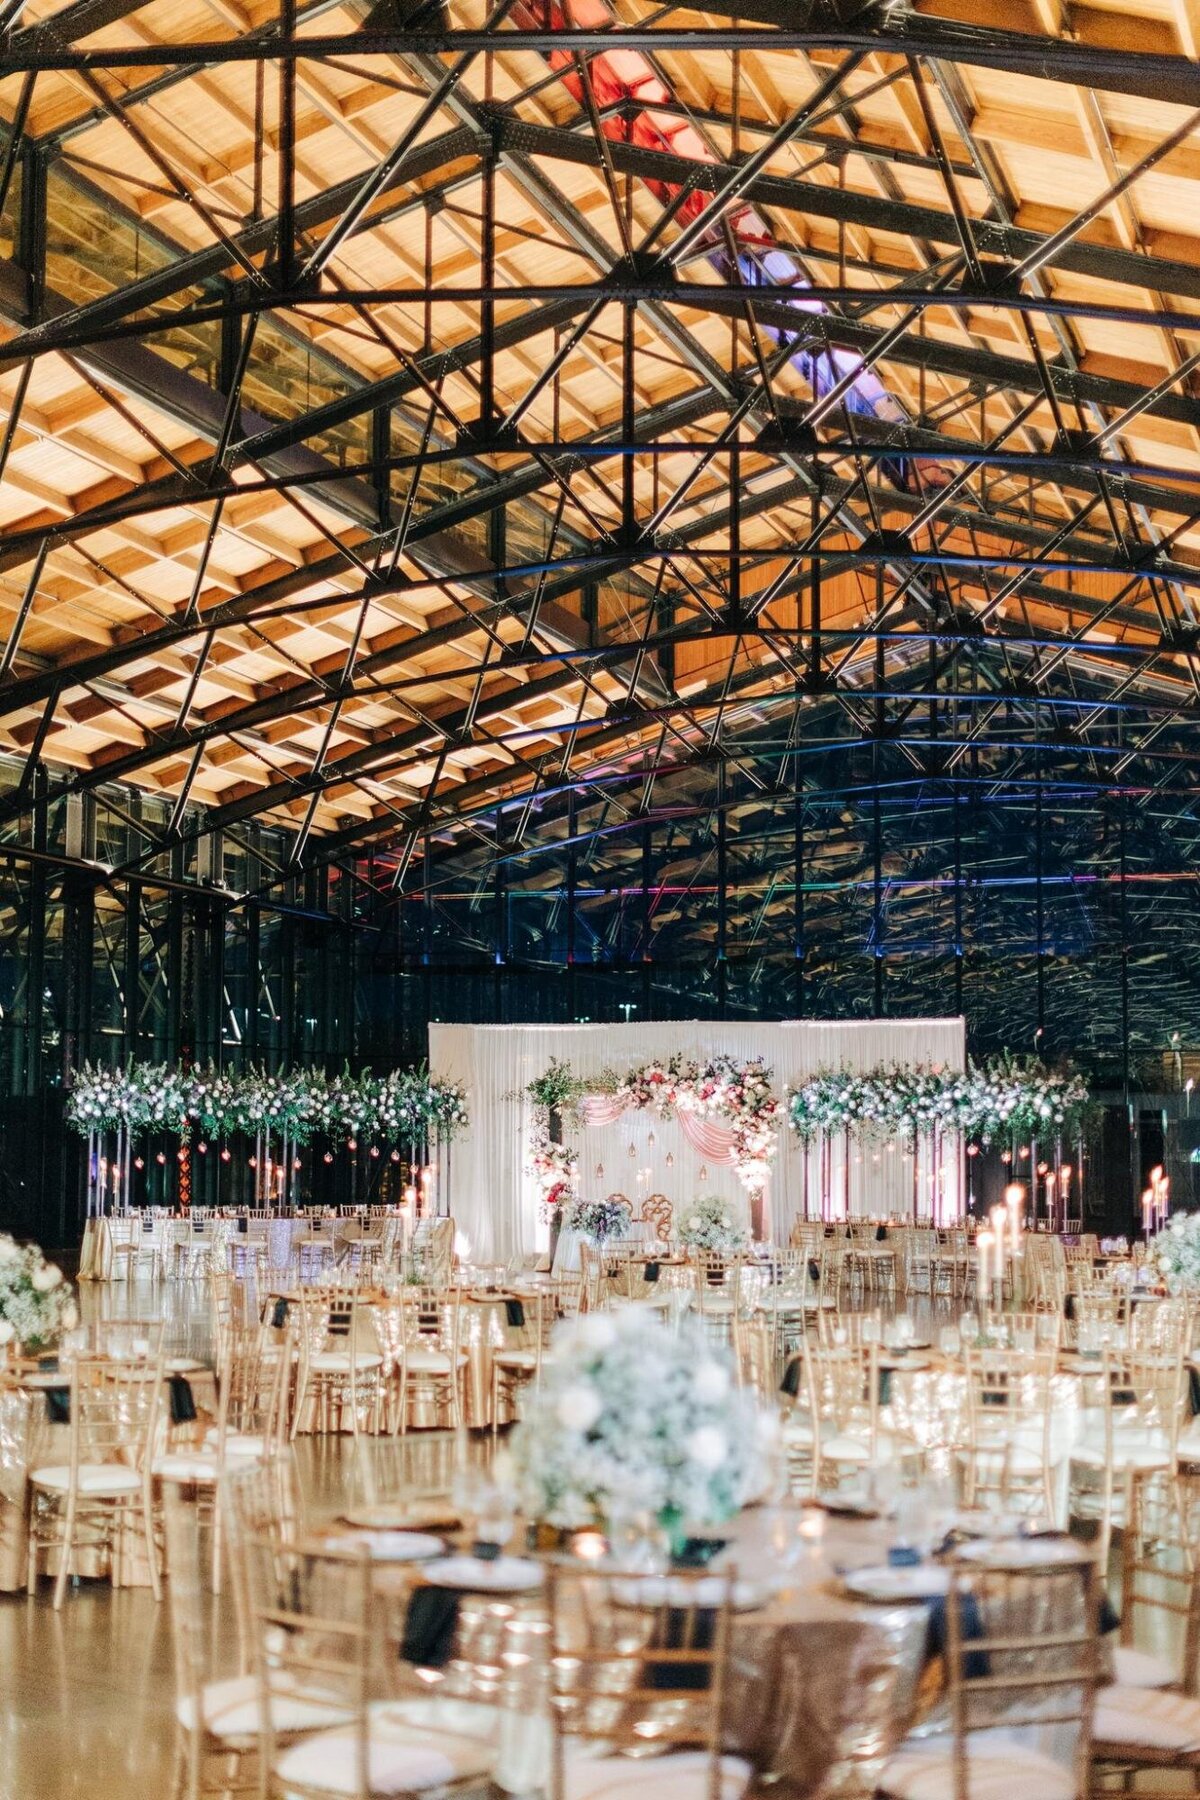 Elegant wedding reception inside a glasshouse with floral decorations and round tables set for dining.